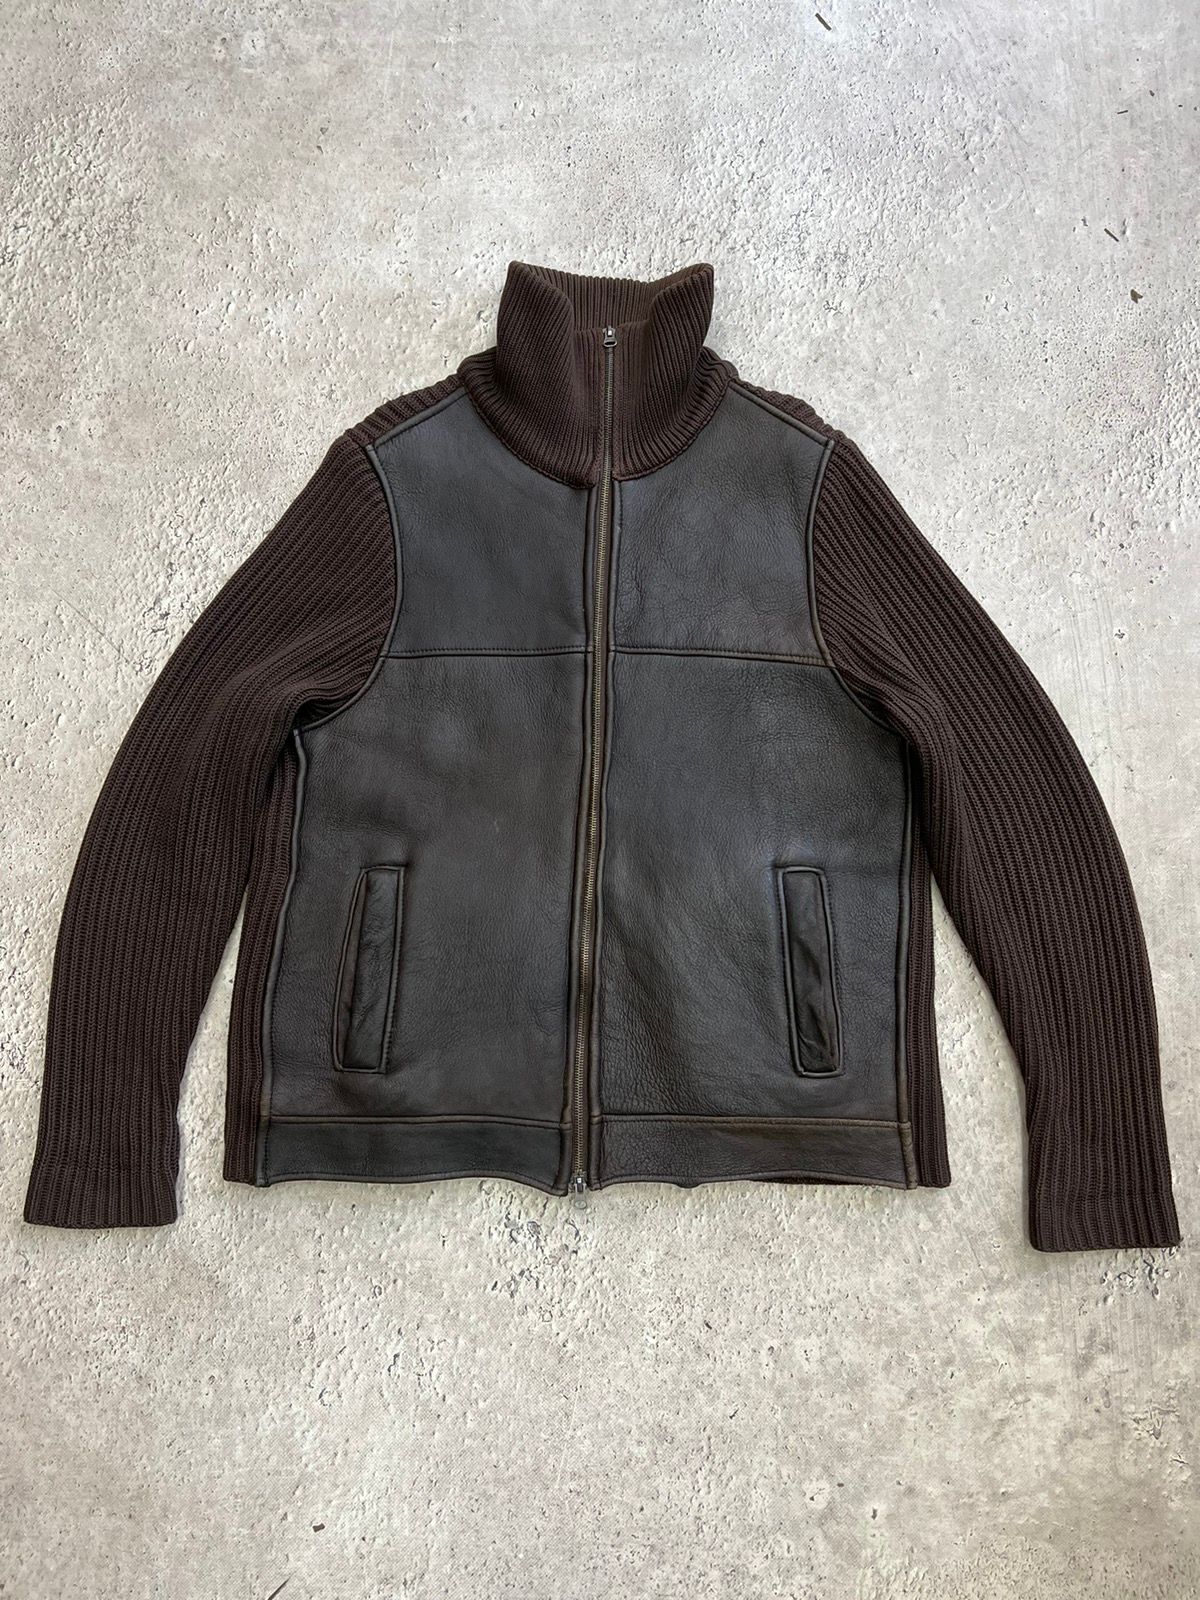 Pre-owned Archival Clothing X Avant Garde 00s Archive Diesel Stripped Bomber Leather Jacket Distressed In Brown